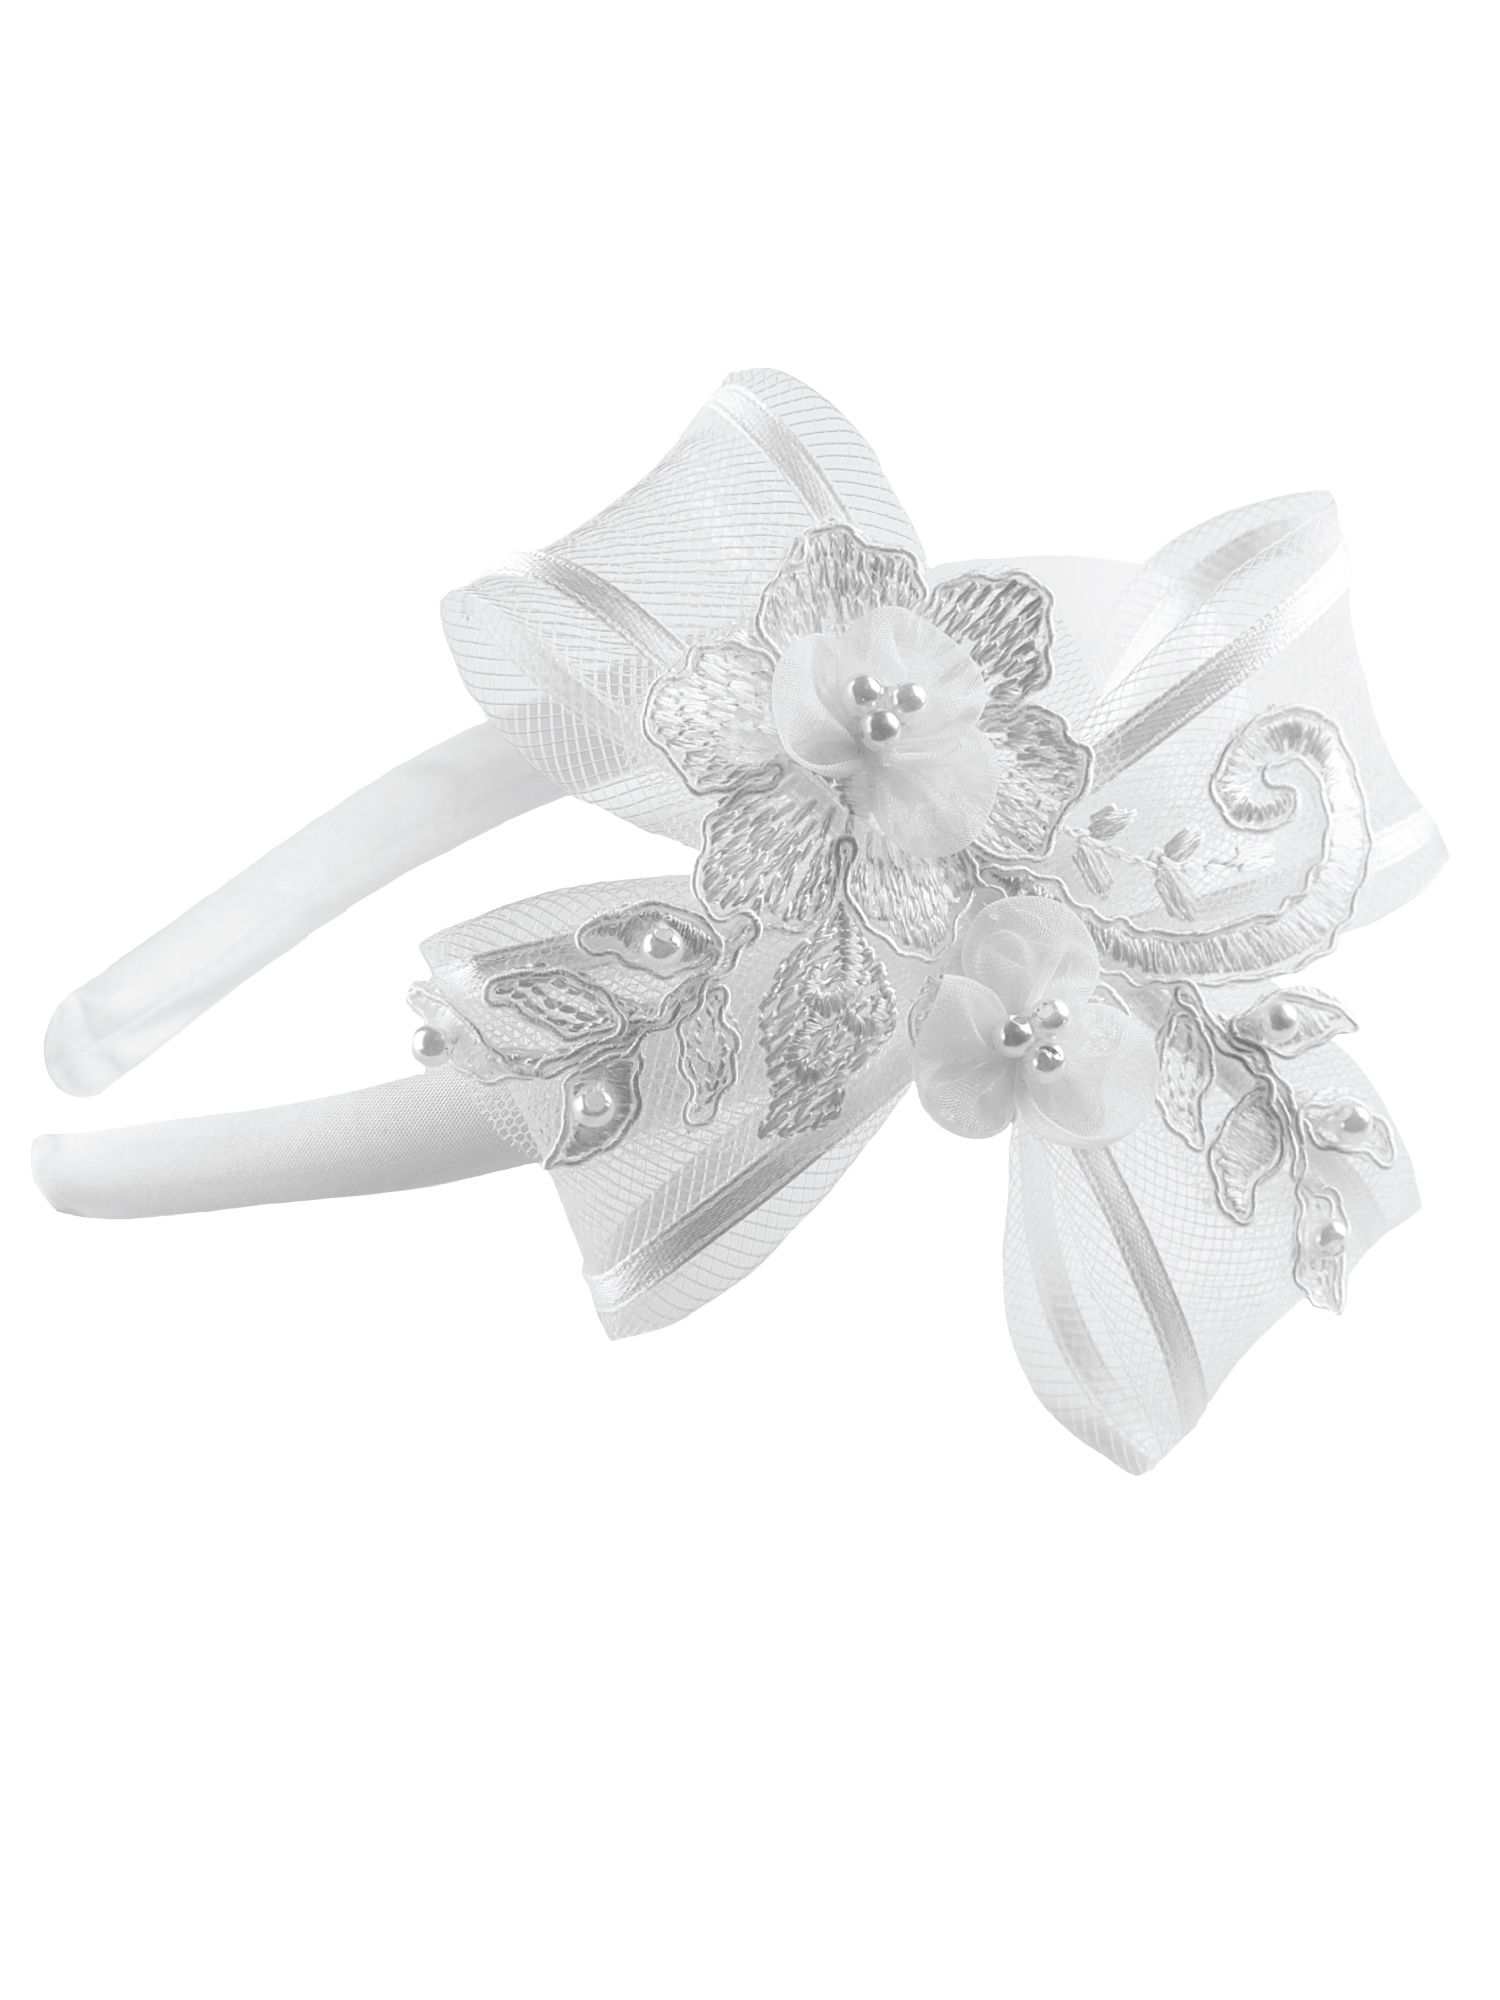 Lana Alice Band in  White. A satin covered Alice band with a 4 way bow made from milliners net and satin ribbon. Guipure lace overlay to match our dress range and topped with pearl centred small organza daisies
This headband compliments all of our Heritage baby girls christening dresses.